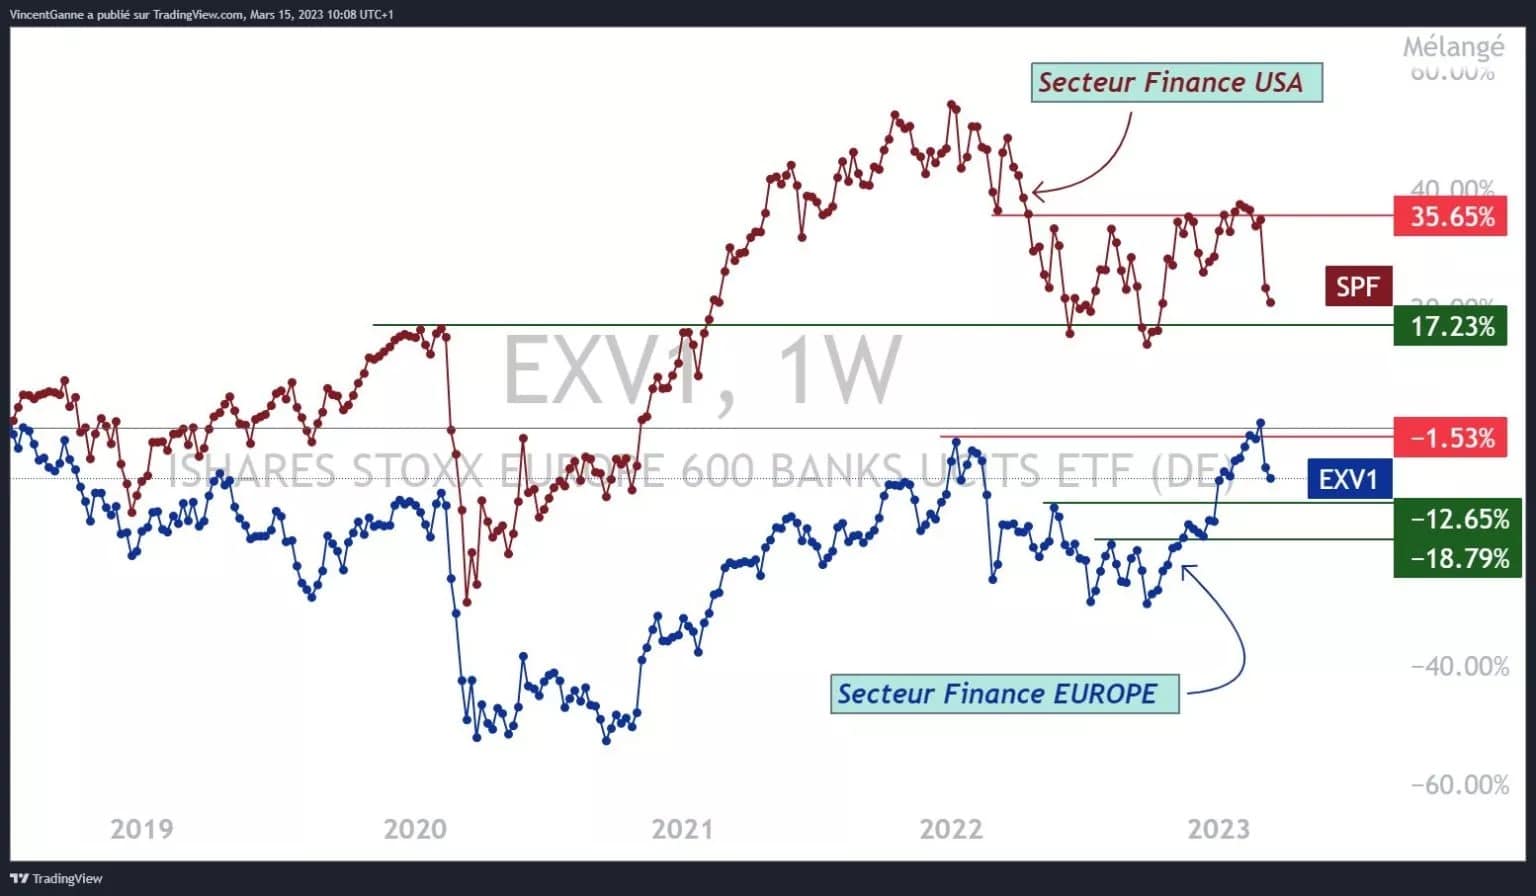 Chart juxtaposing the Banking/Finance sector indices of the US equity market and the European equity market